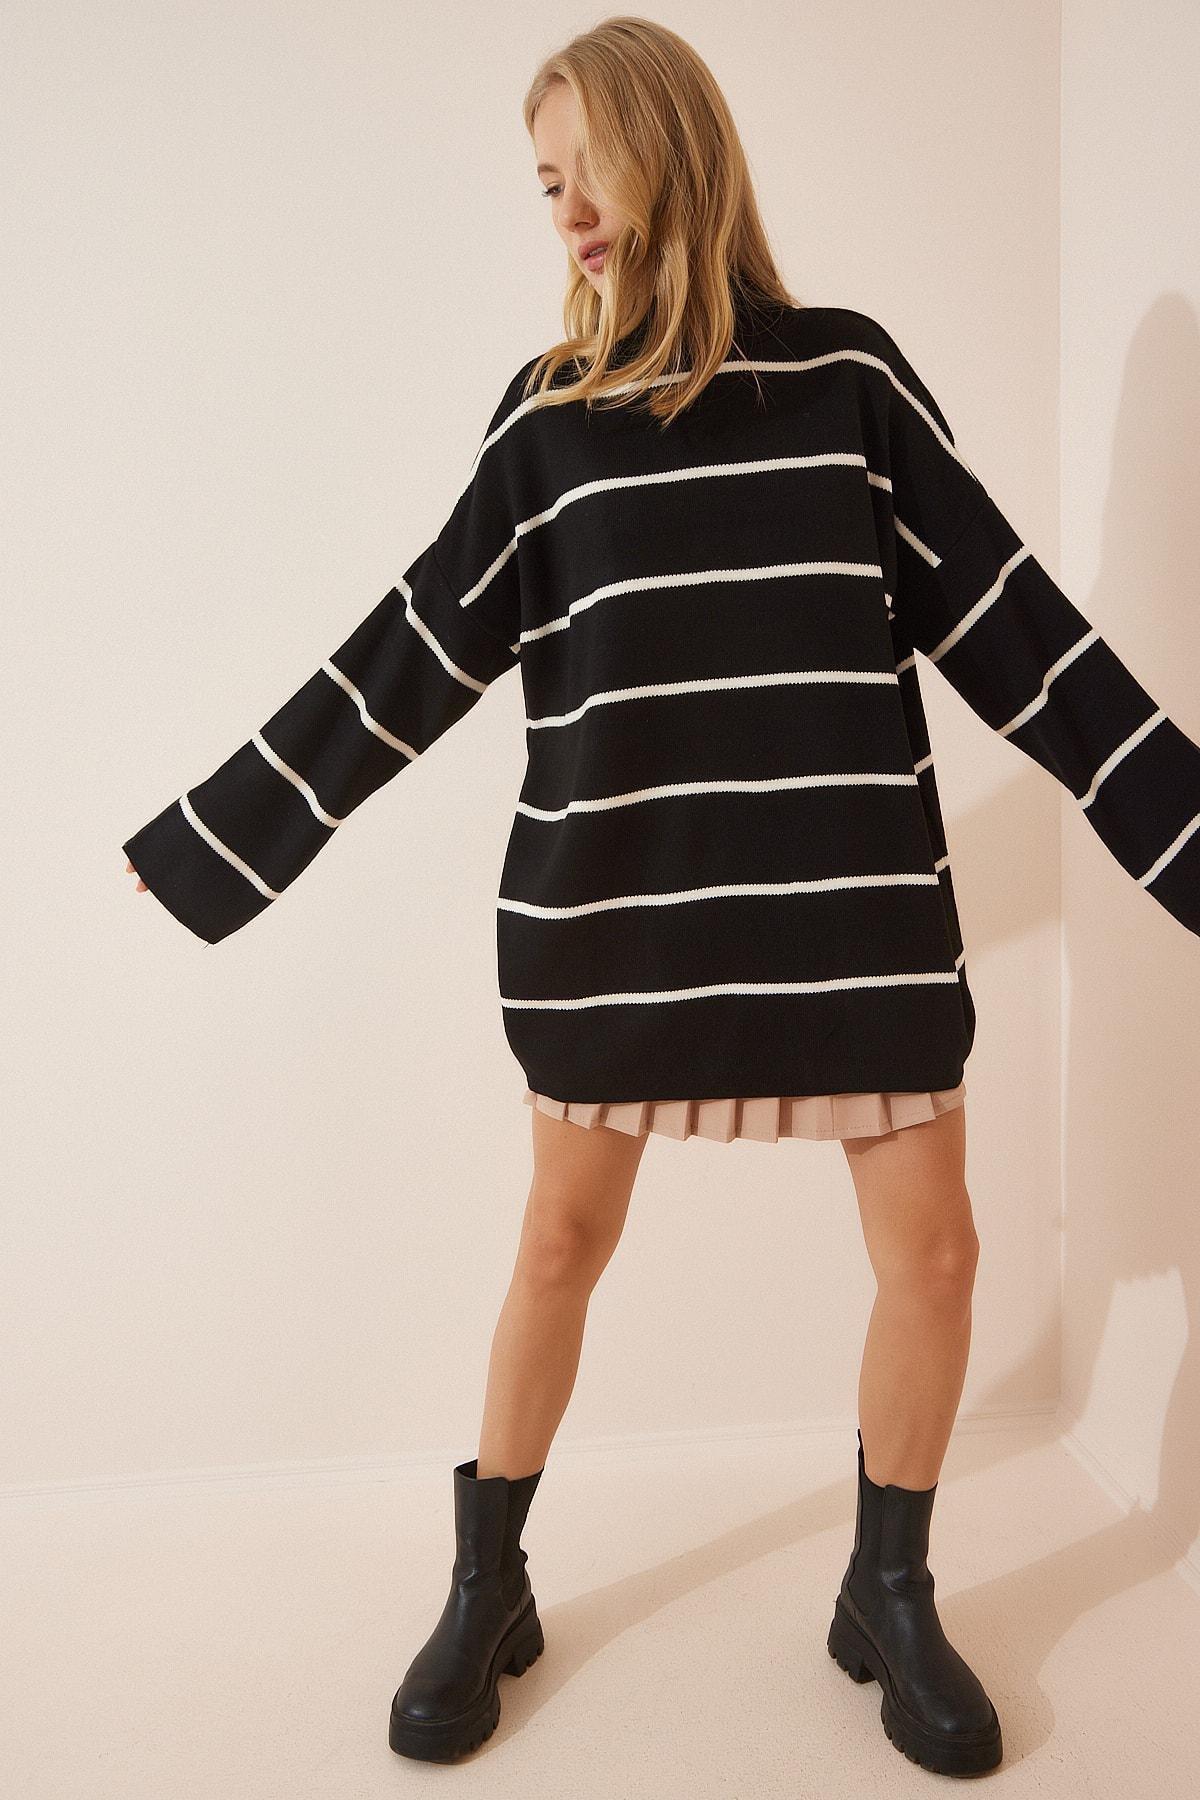 Happiness Istanbul - Black Striped Oversize Sweater